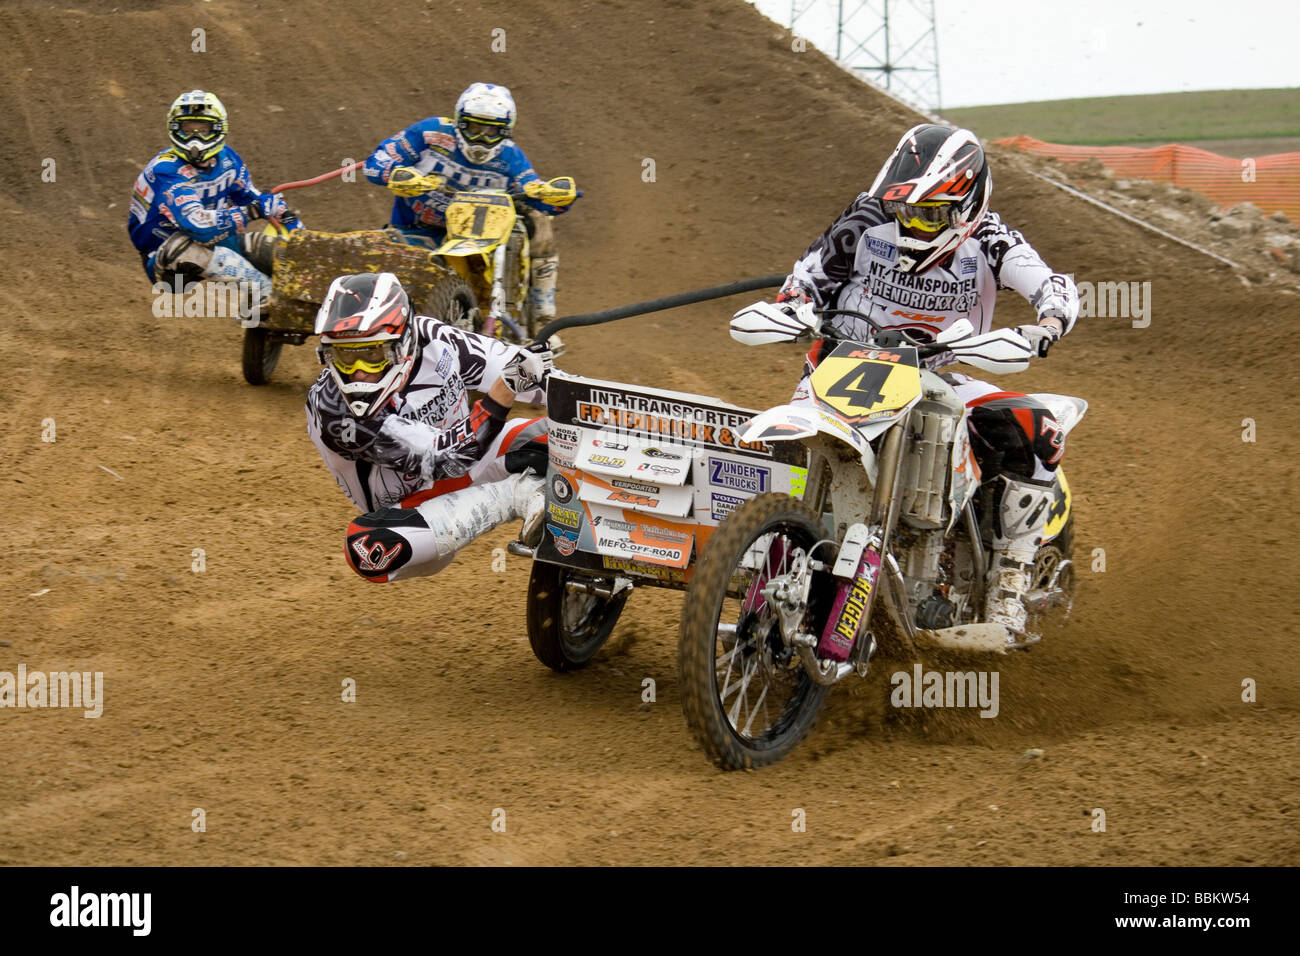 Photographs of sidecars motocross race taken during European Cup in Gdansk Stock Photo